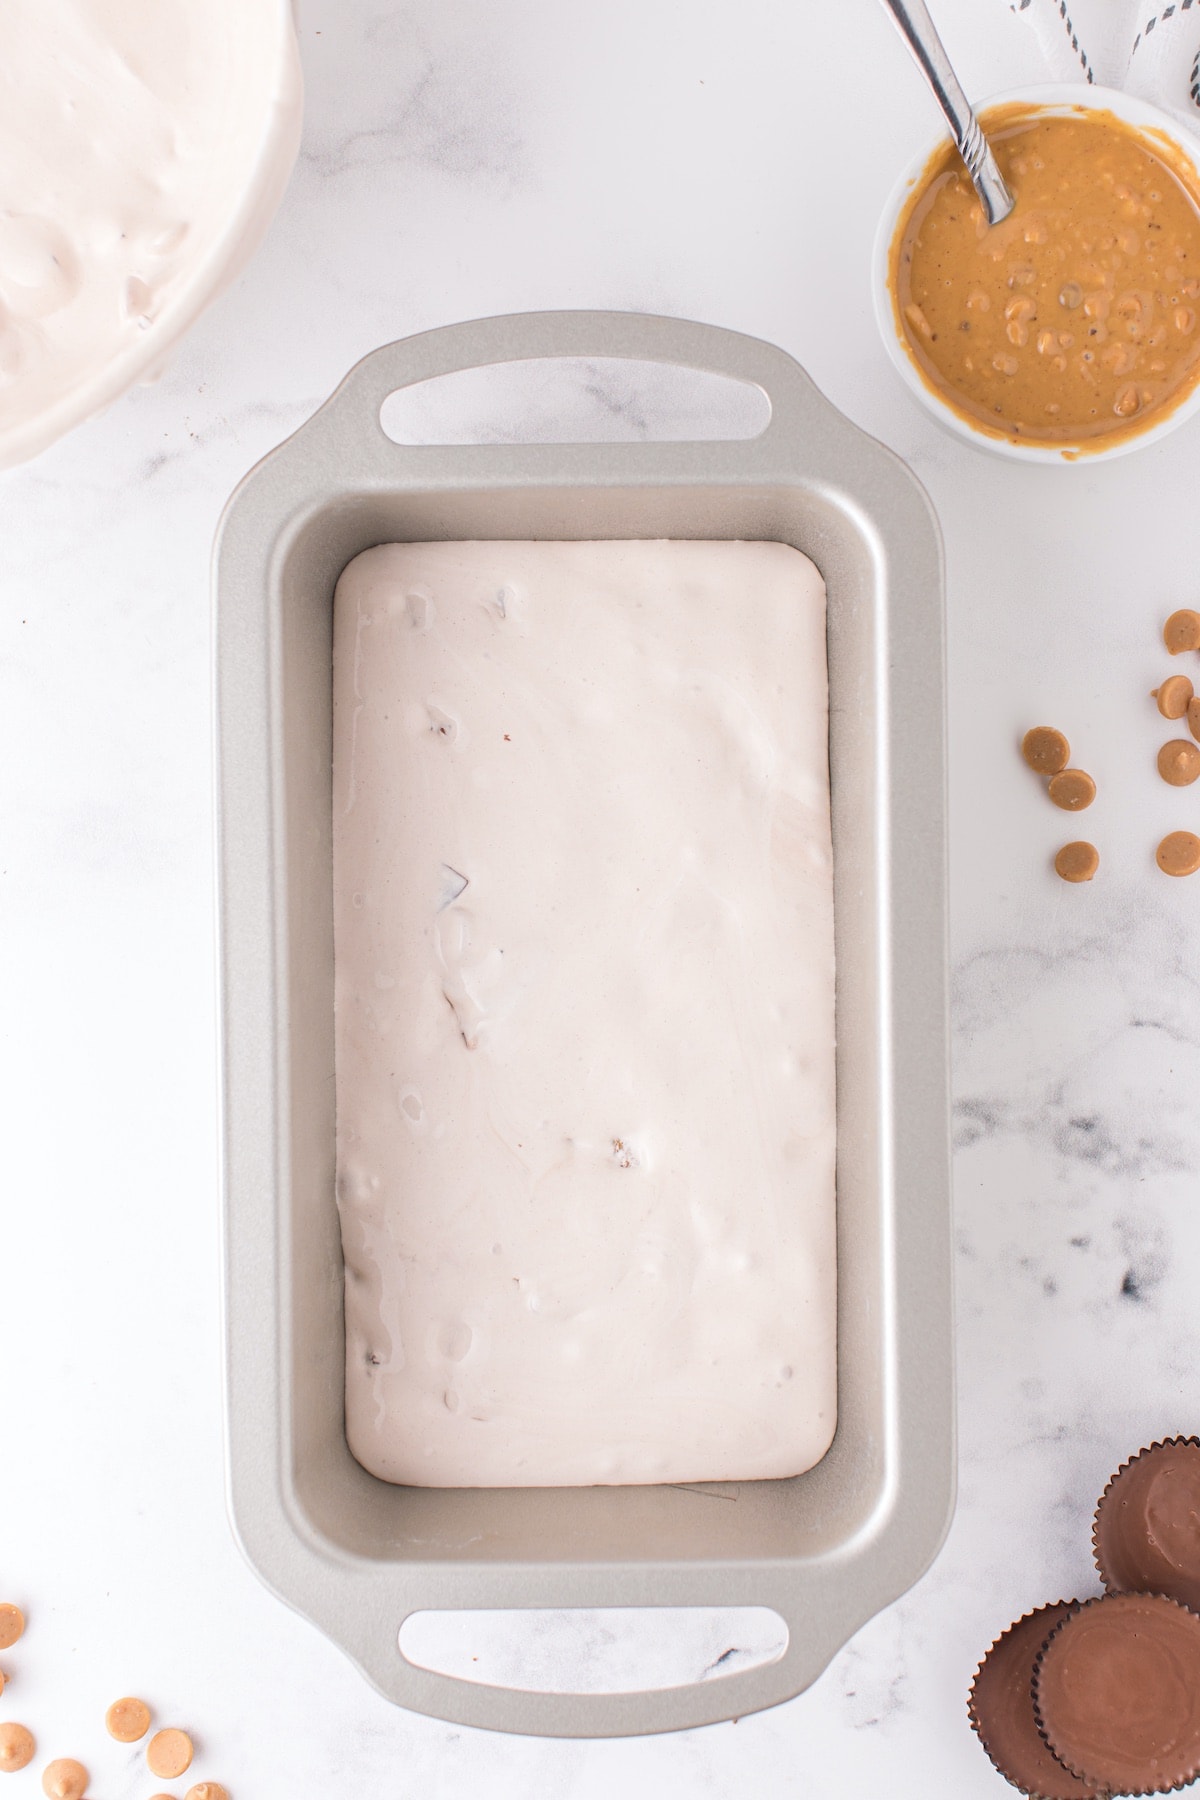 Pour half of the ice cream mixture into a prepared loaf pan